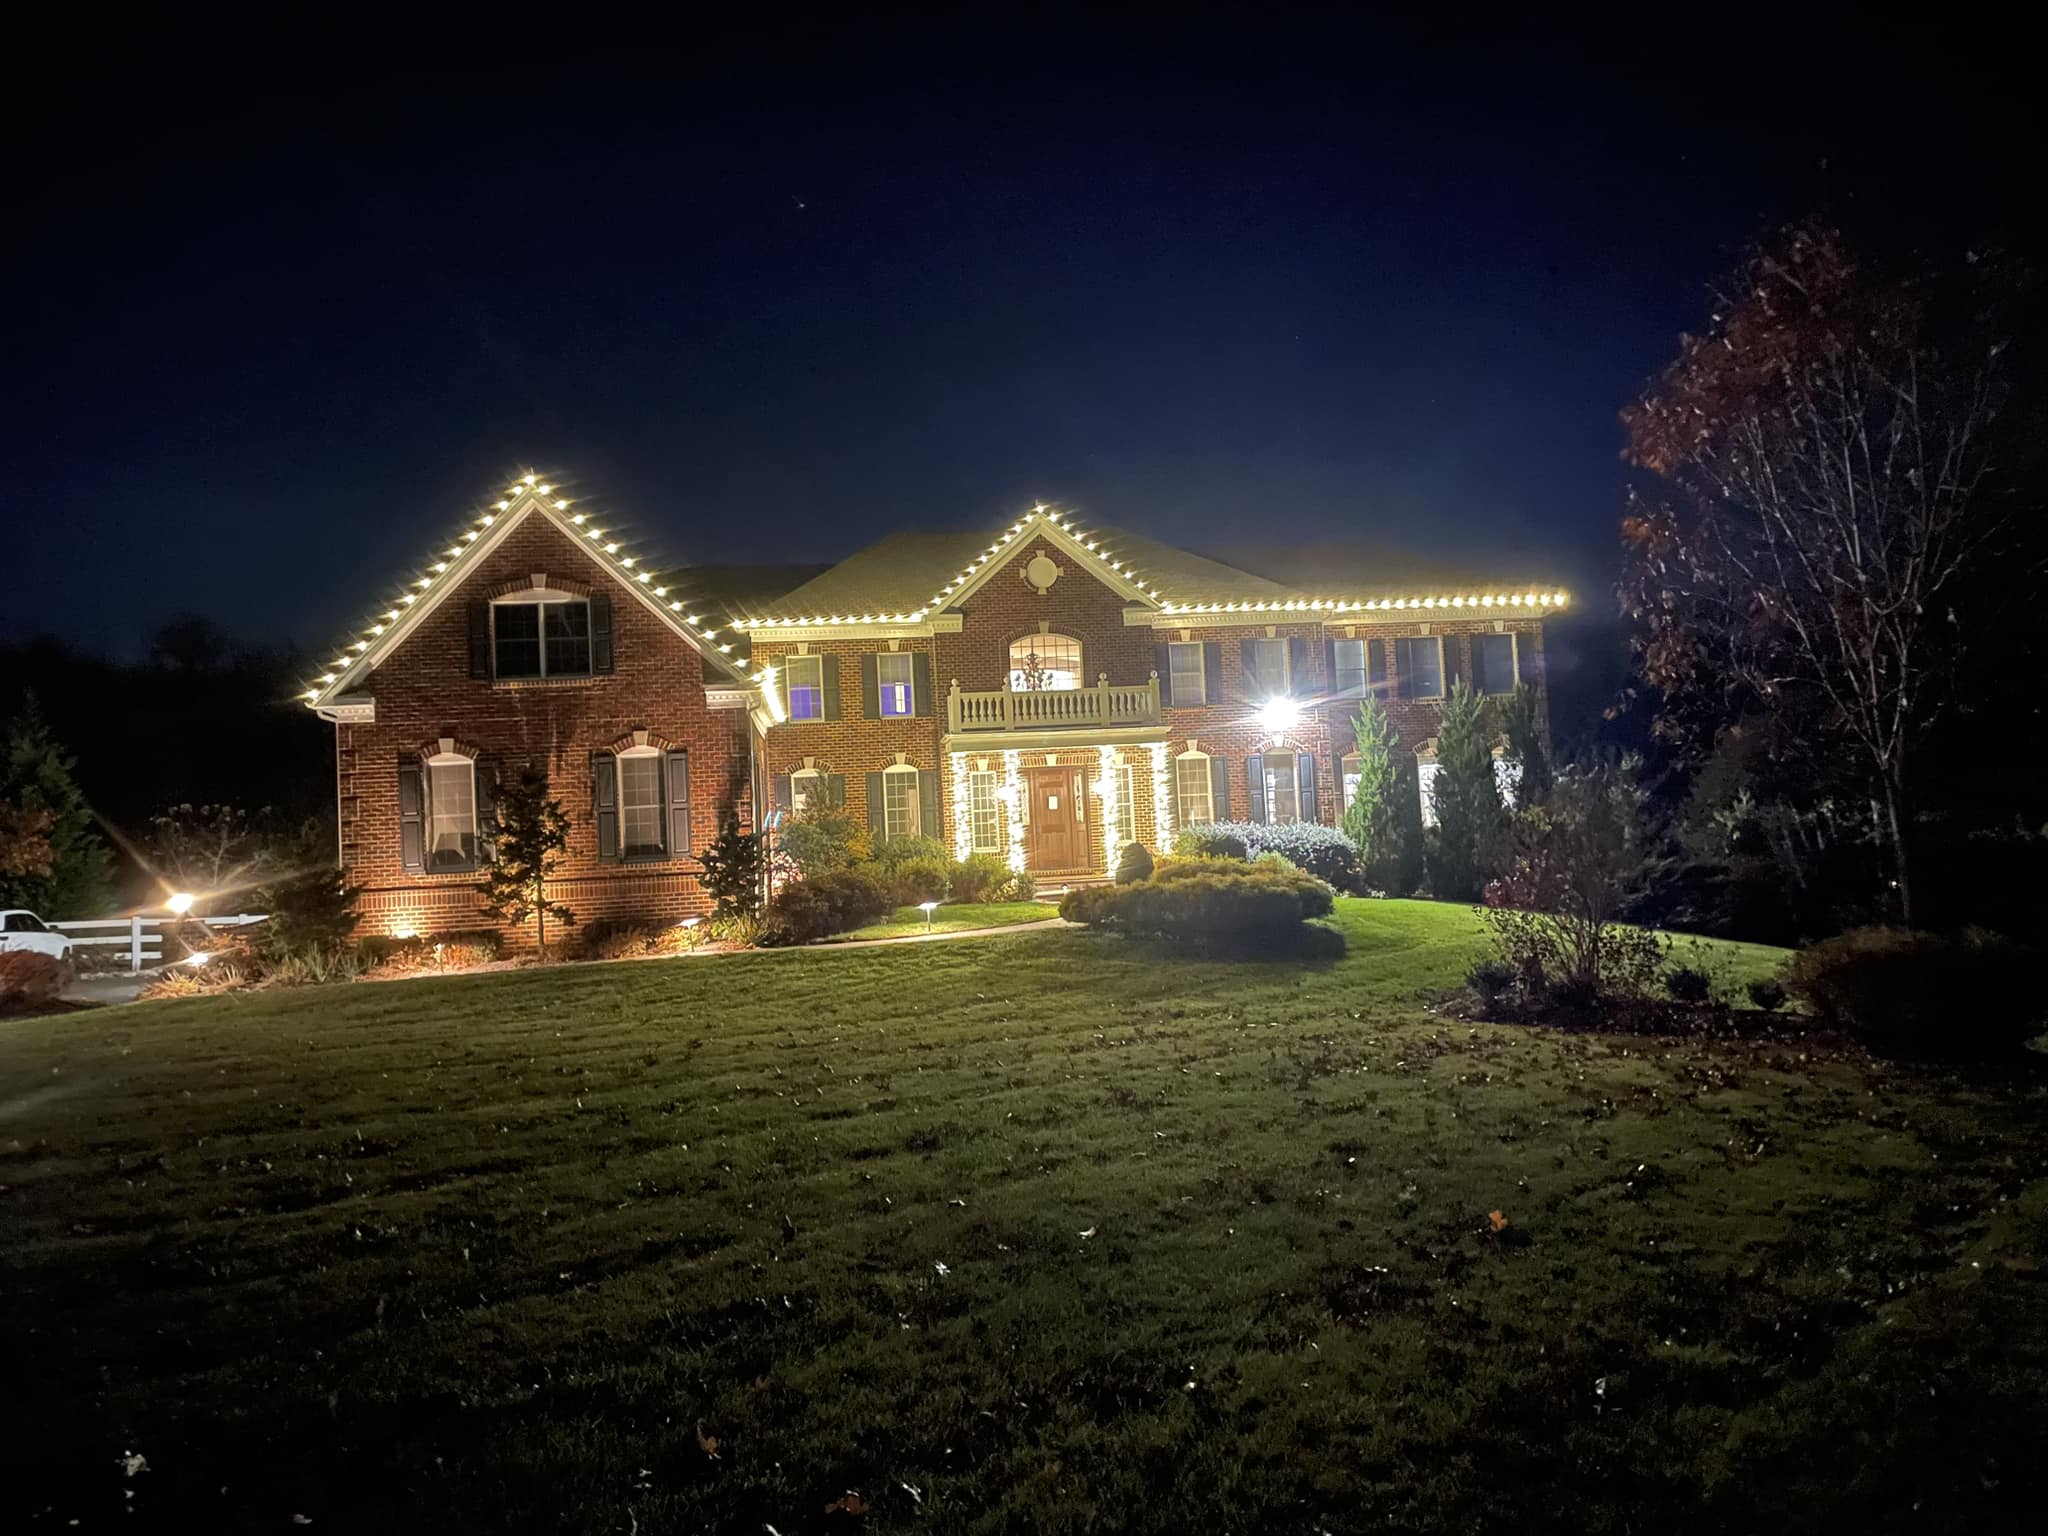 Christmas Light Hanging Services